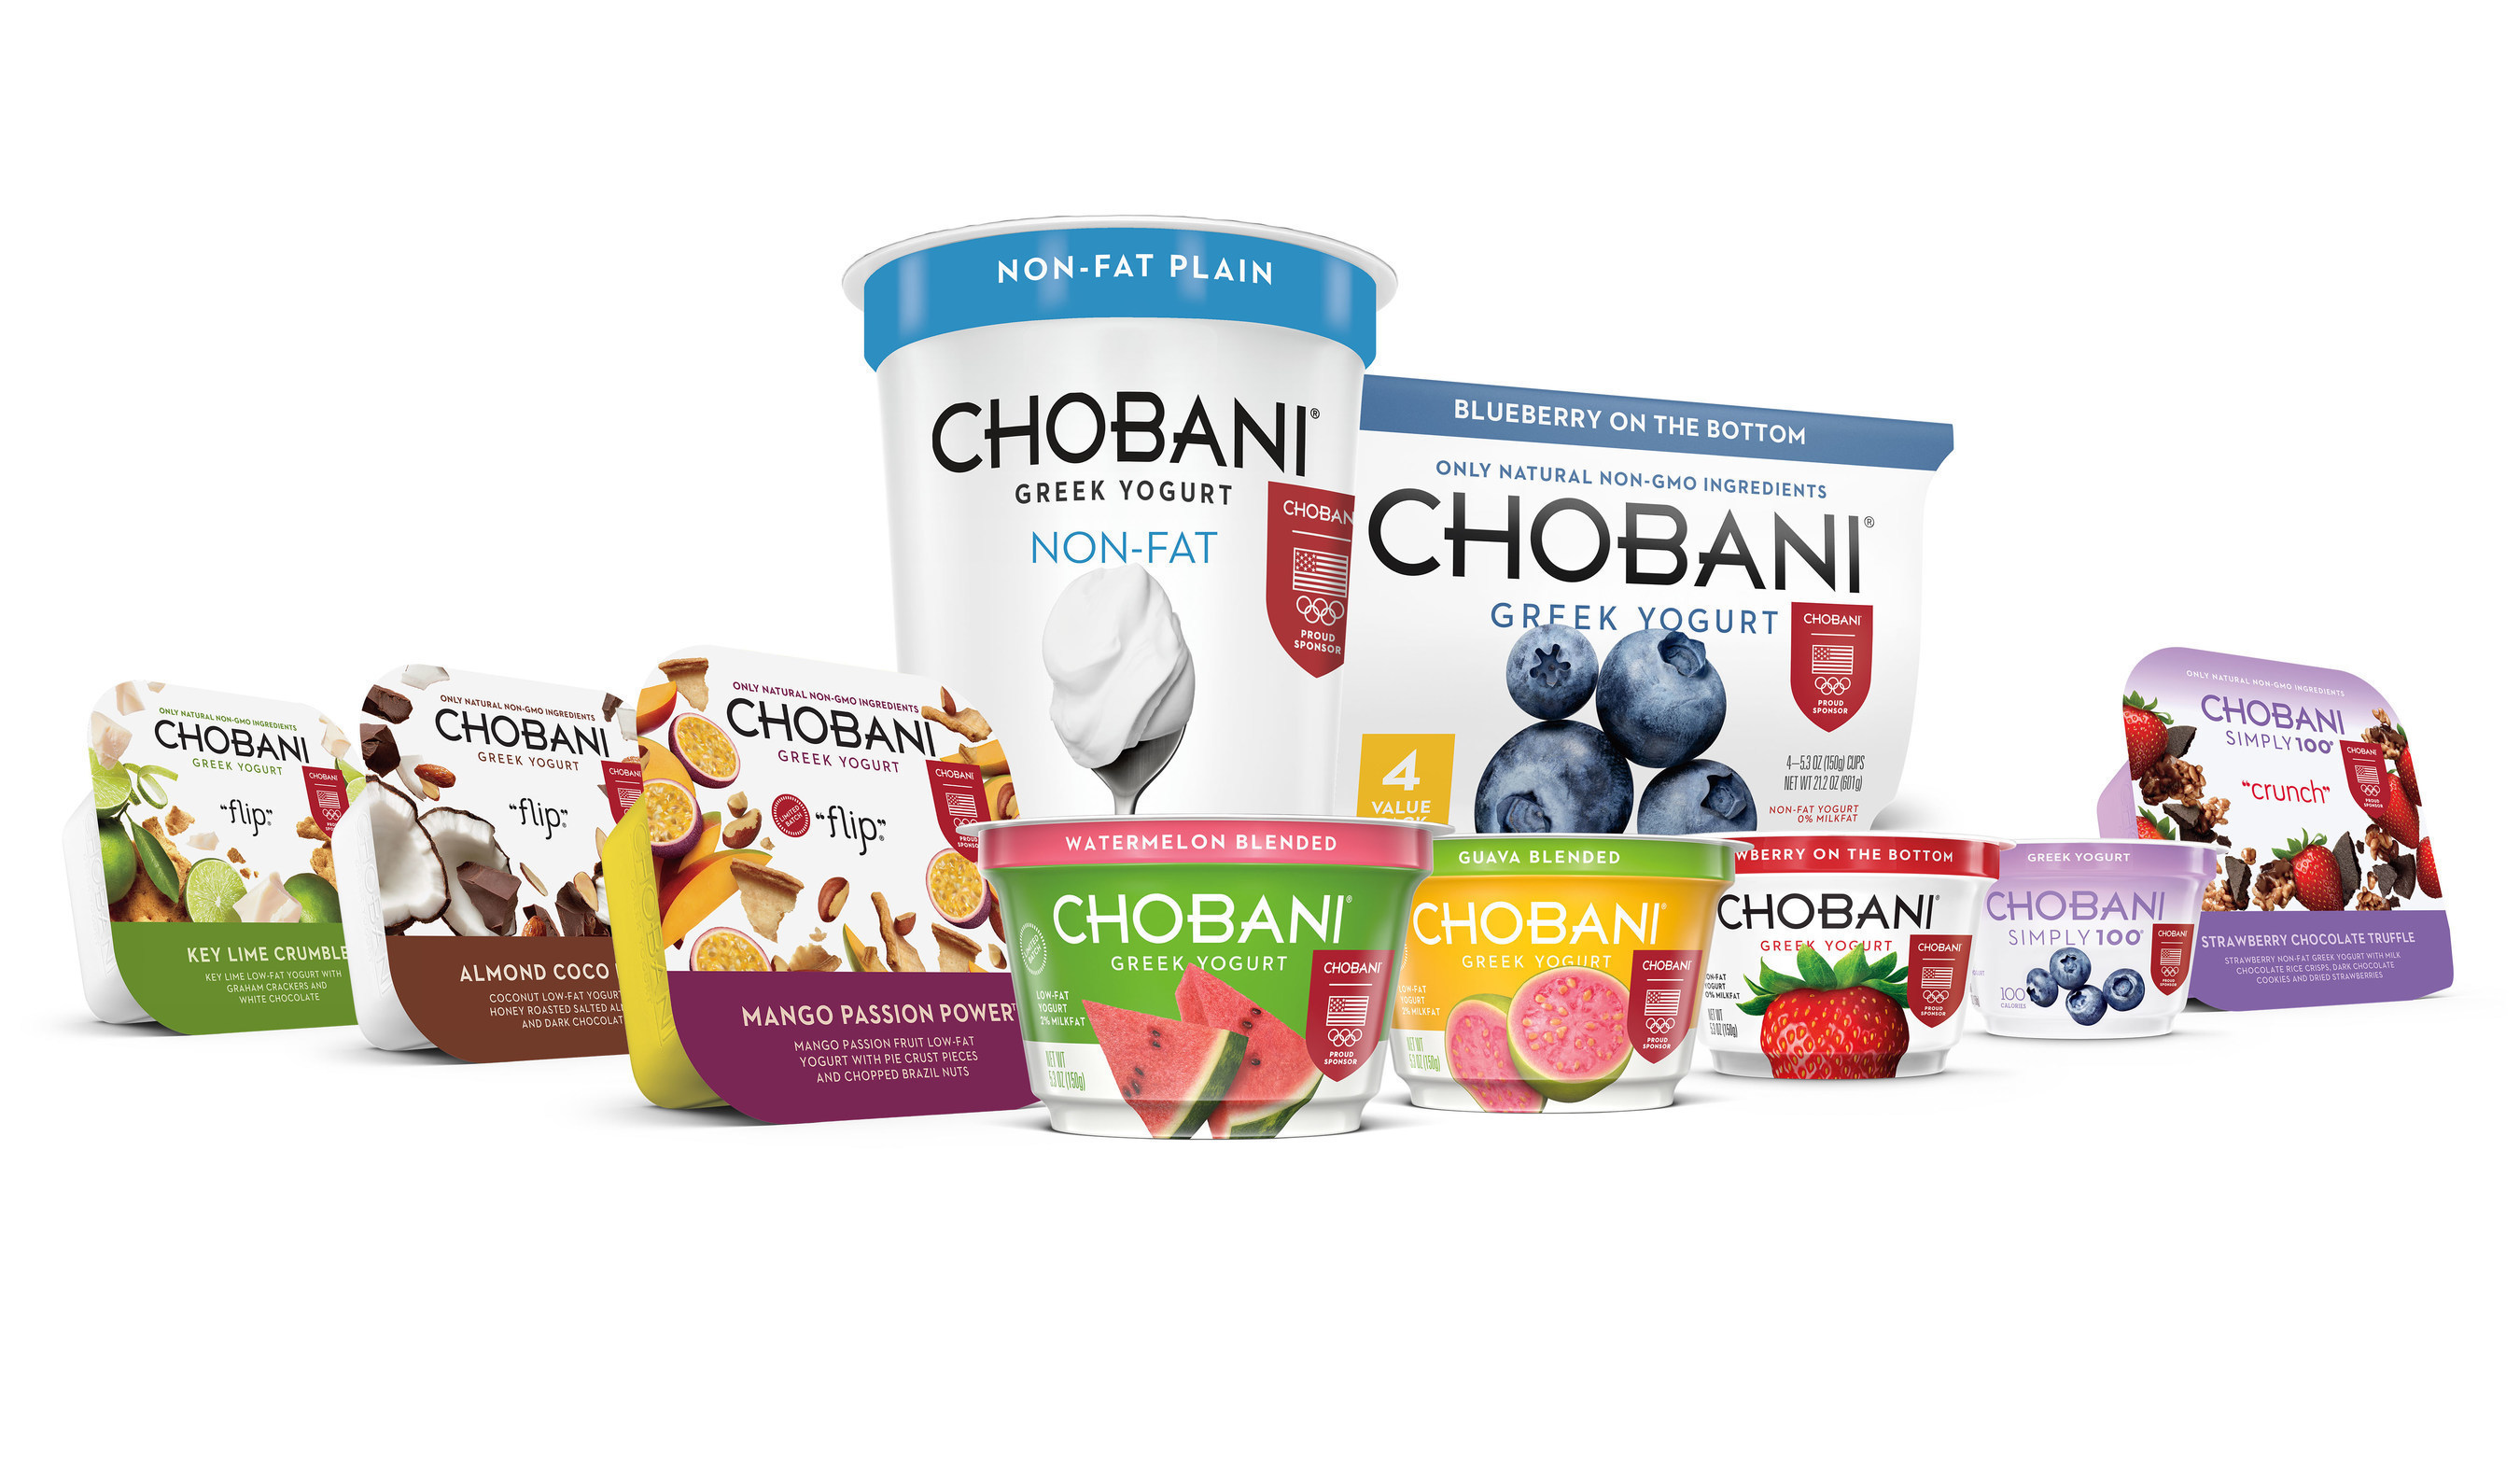 Chobani products across multiple product lines including Chobani "Flip"(tm) and Chobani Simply 100(r) products will adorn the official Team USA shield and Olympic rings on pack to denote the partnership.